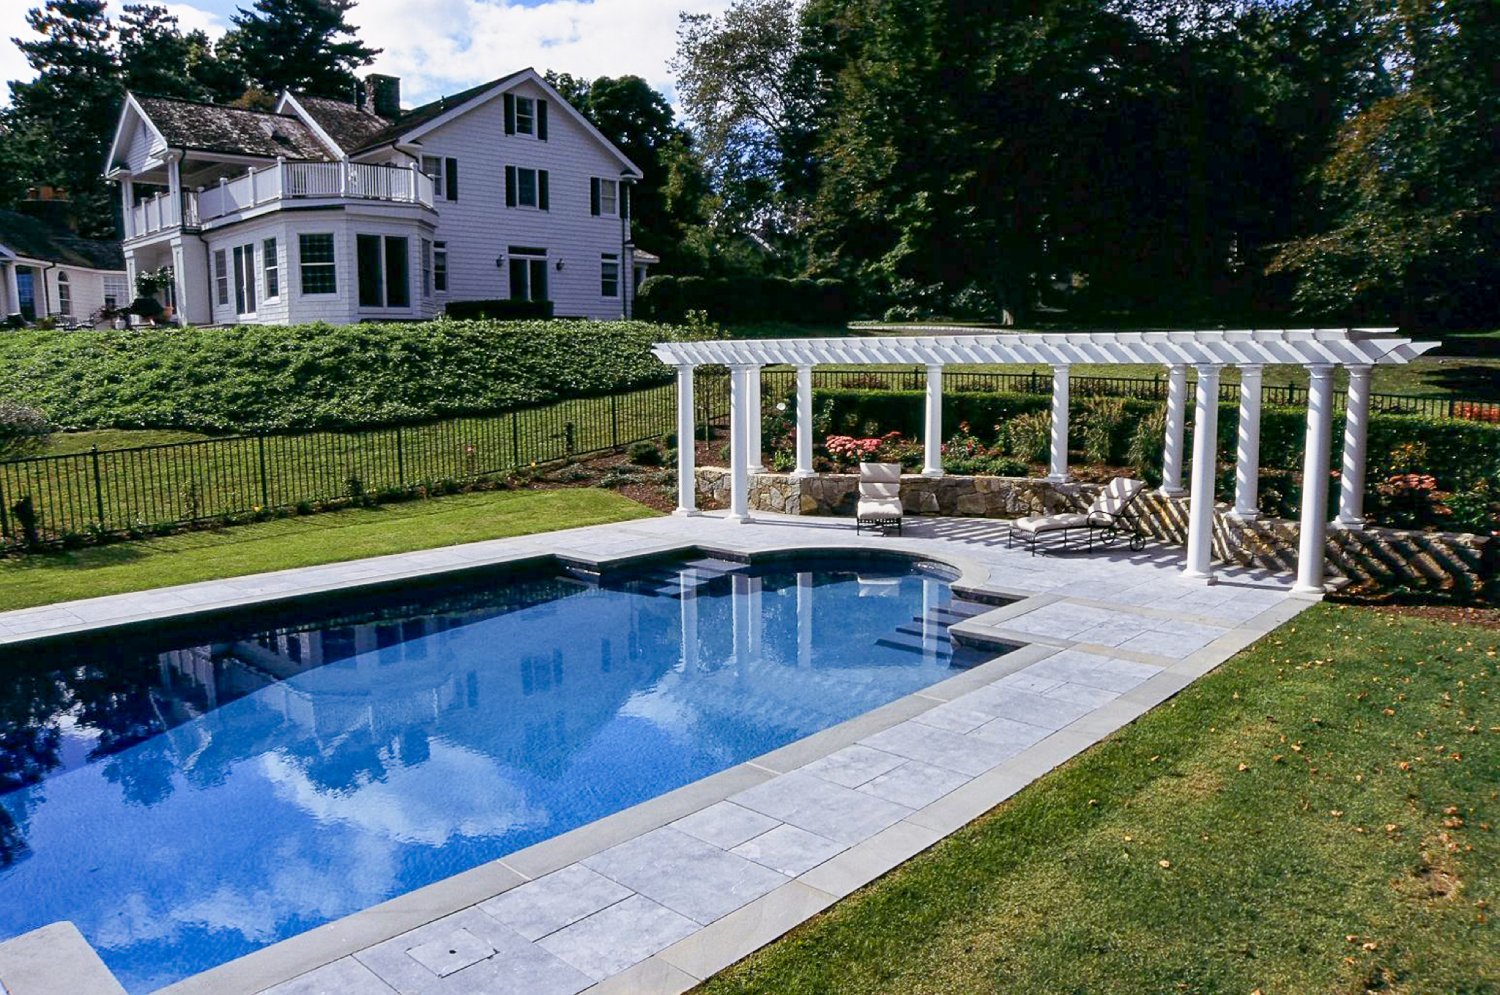 White pergola by the pool with a house on the hill